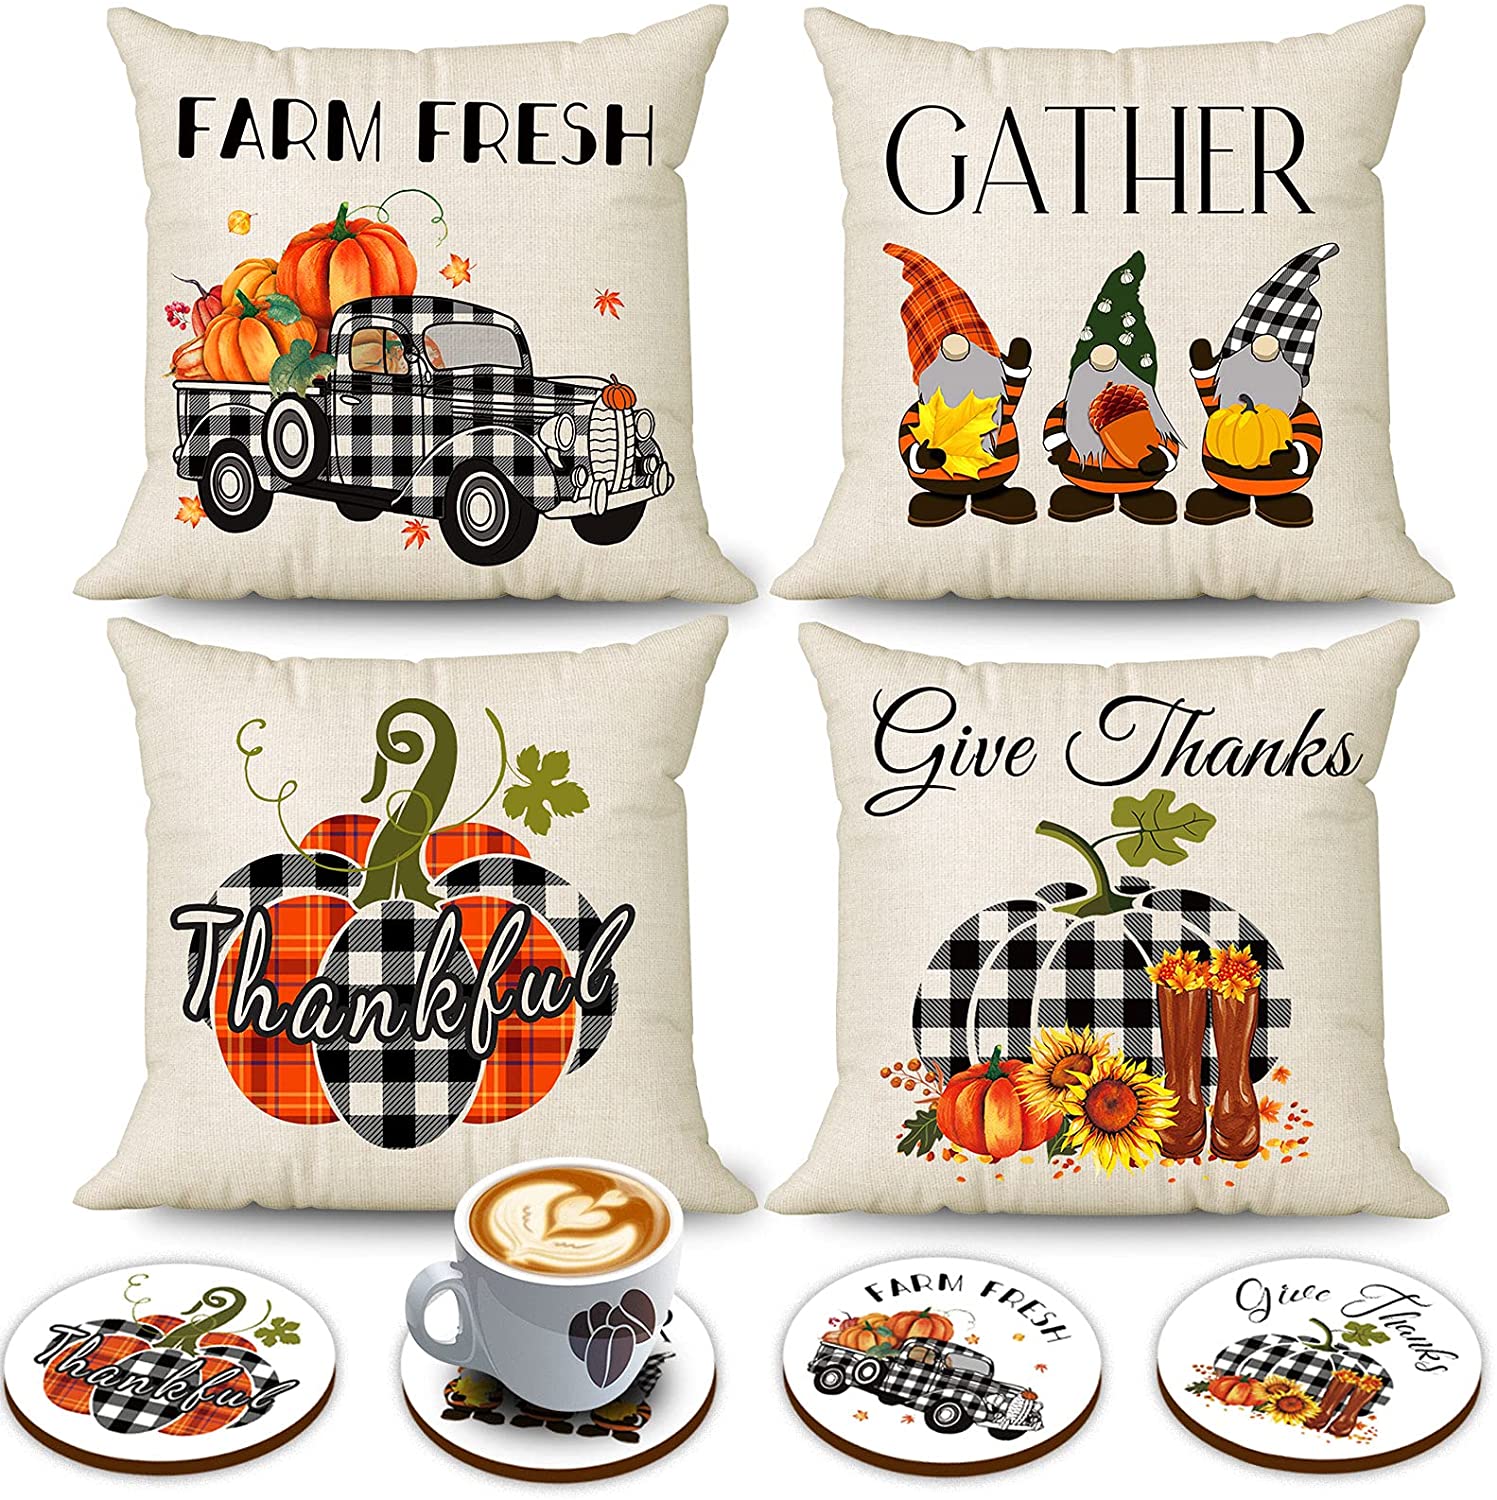 Set of 4 Buffalo Plaid Fall Pillow Covers 18 x 18 with 4 Bonus Coasters (Patch, Gnome, Truck))